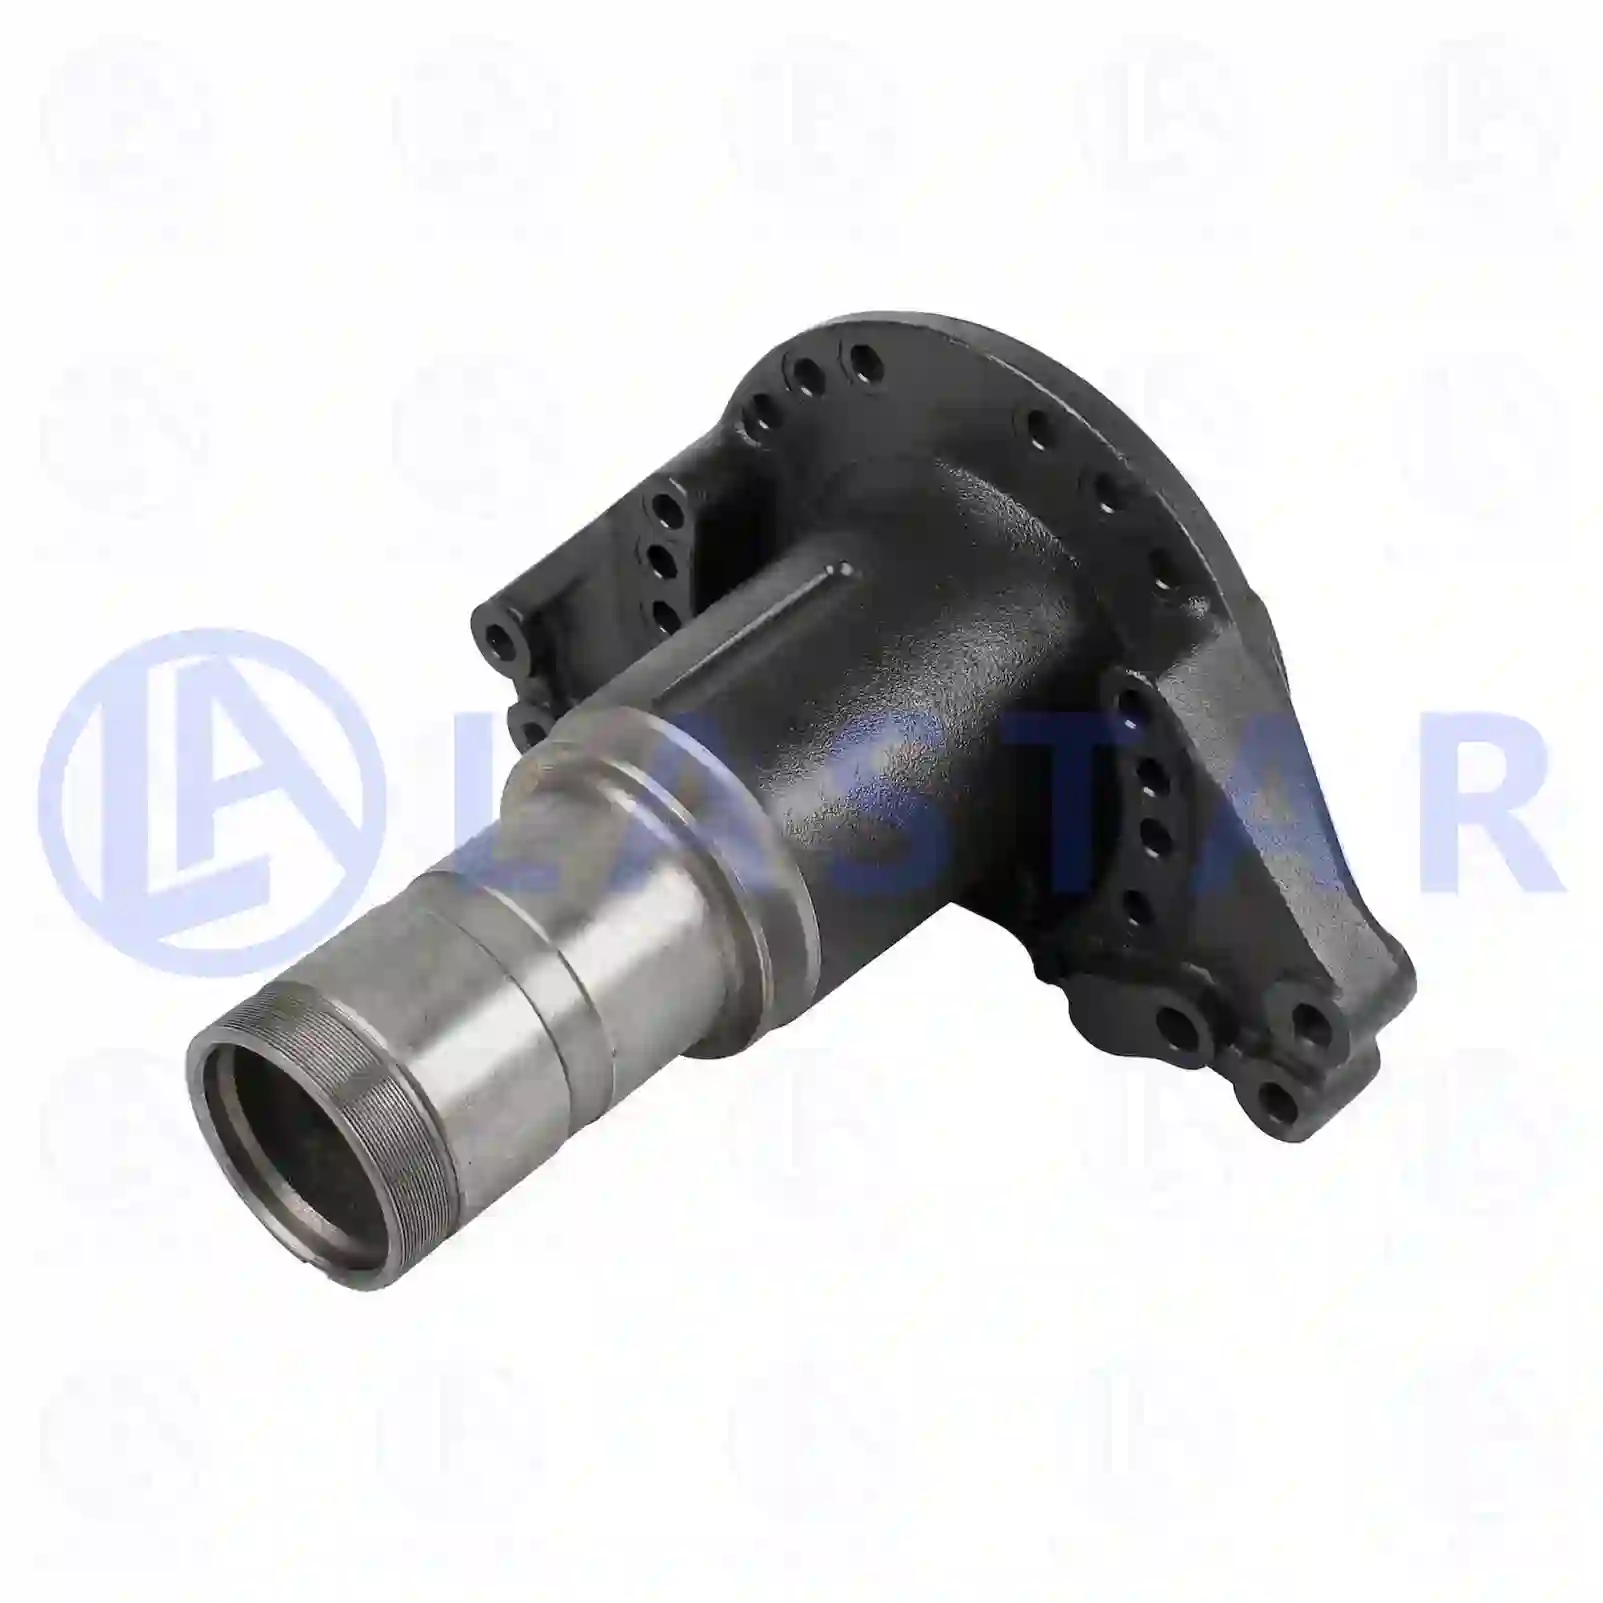 Support, axle housing, 77732737, 3570405 ||  77732737 Lastar Spare Part | Truck Spare Parts, Auotomotive Spare Parts Support, axle housing, 77732737, 3570405 ||  77732737 Lastar Spare Part | Truck Spare Parts, Auotomotive Spare Parts